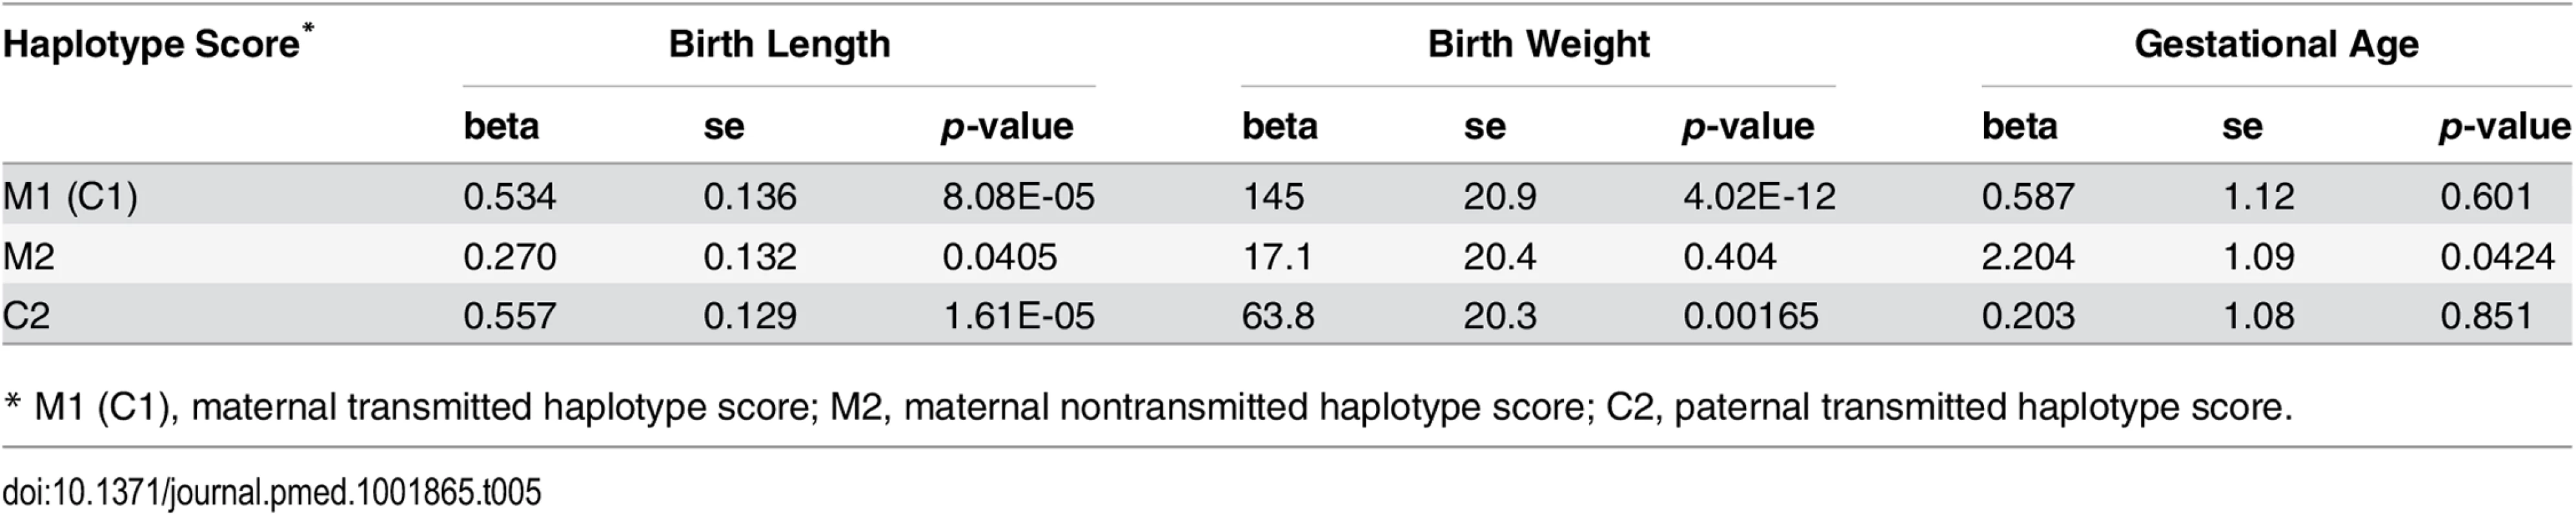 Association between haplotype genetic scores and pregnancy outcomes.